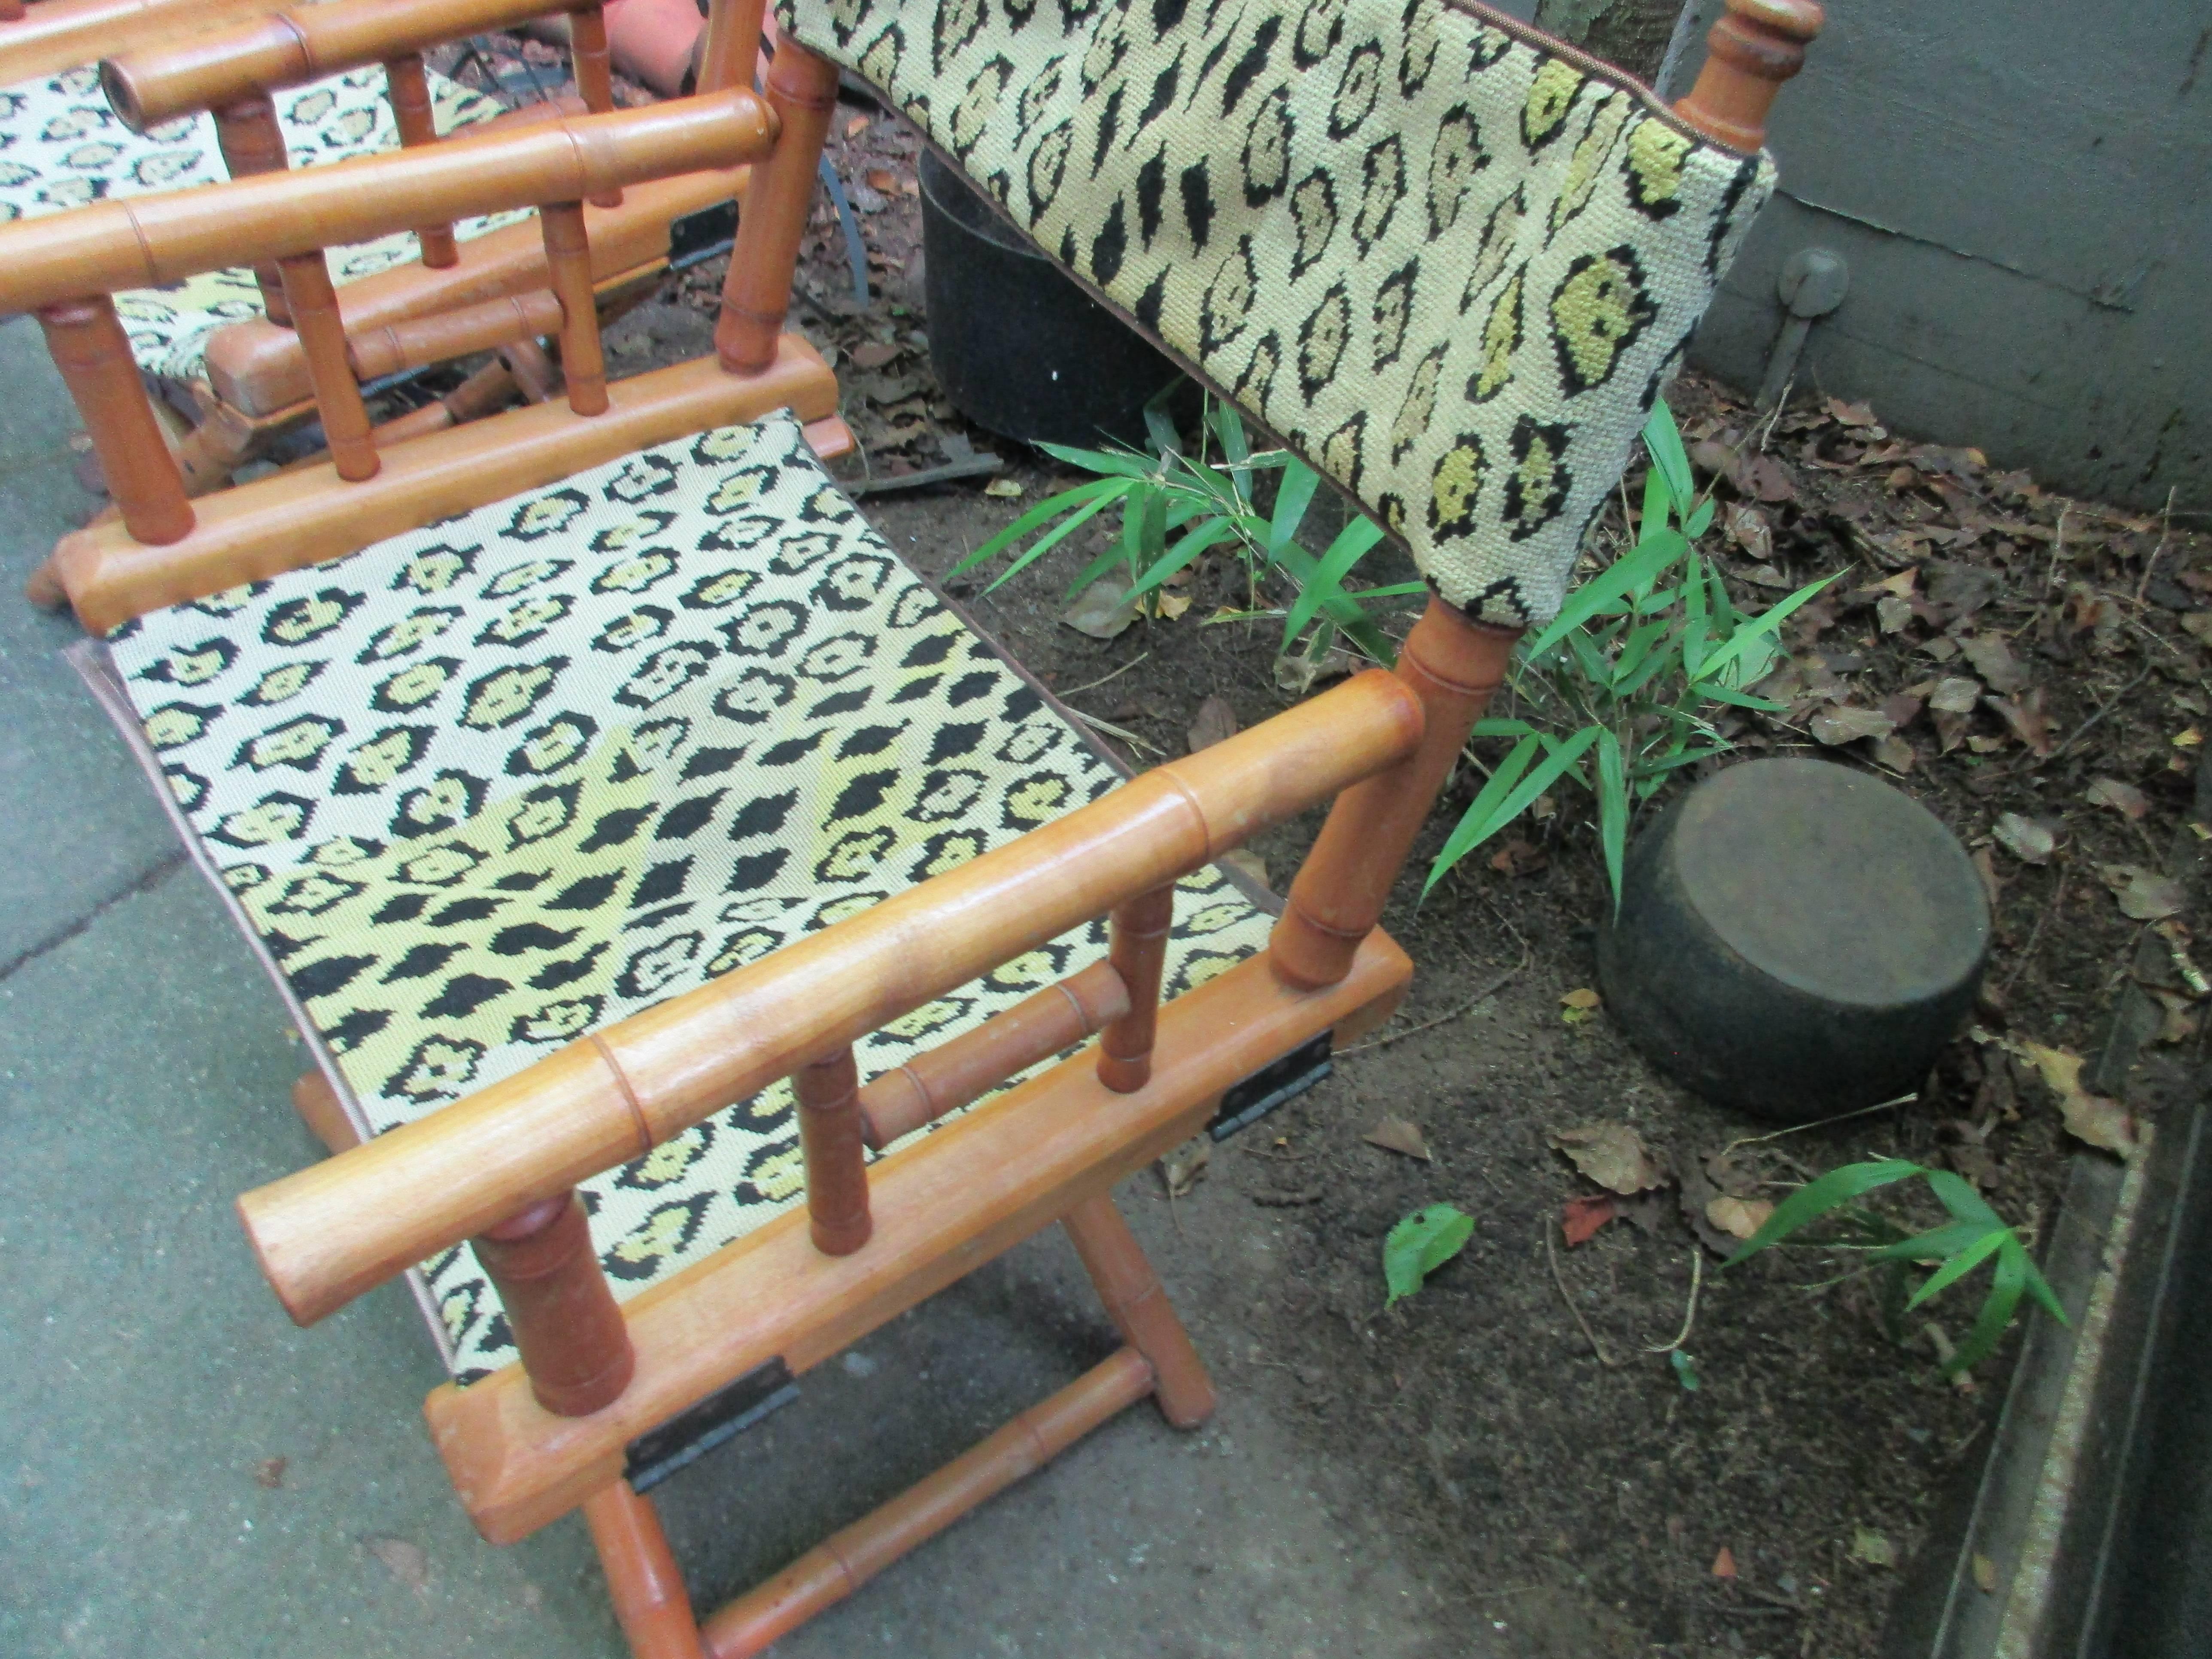 1950s faux bamboo folding chairs with handmade needlepoint seats and
backs.